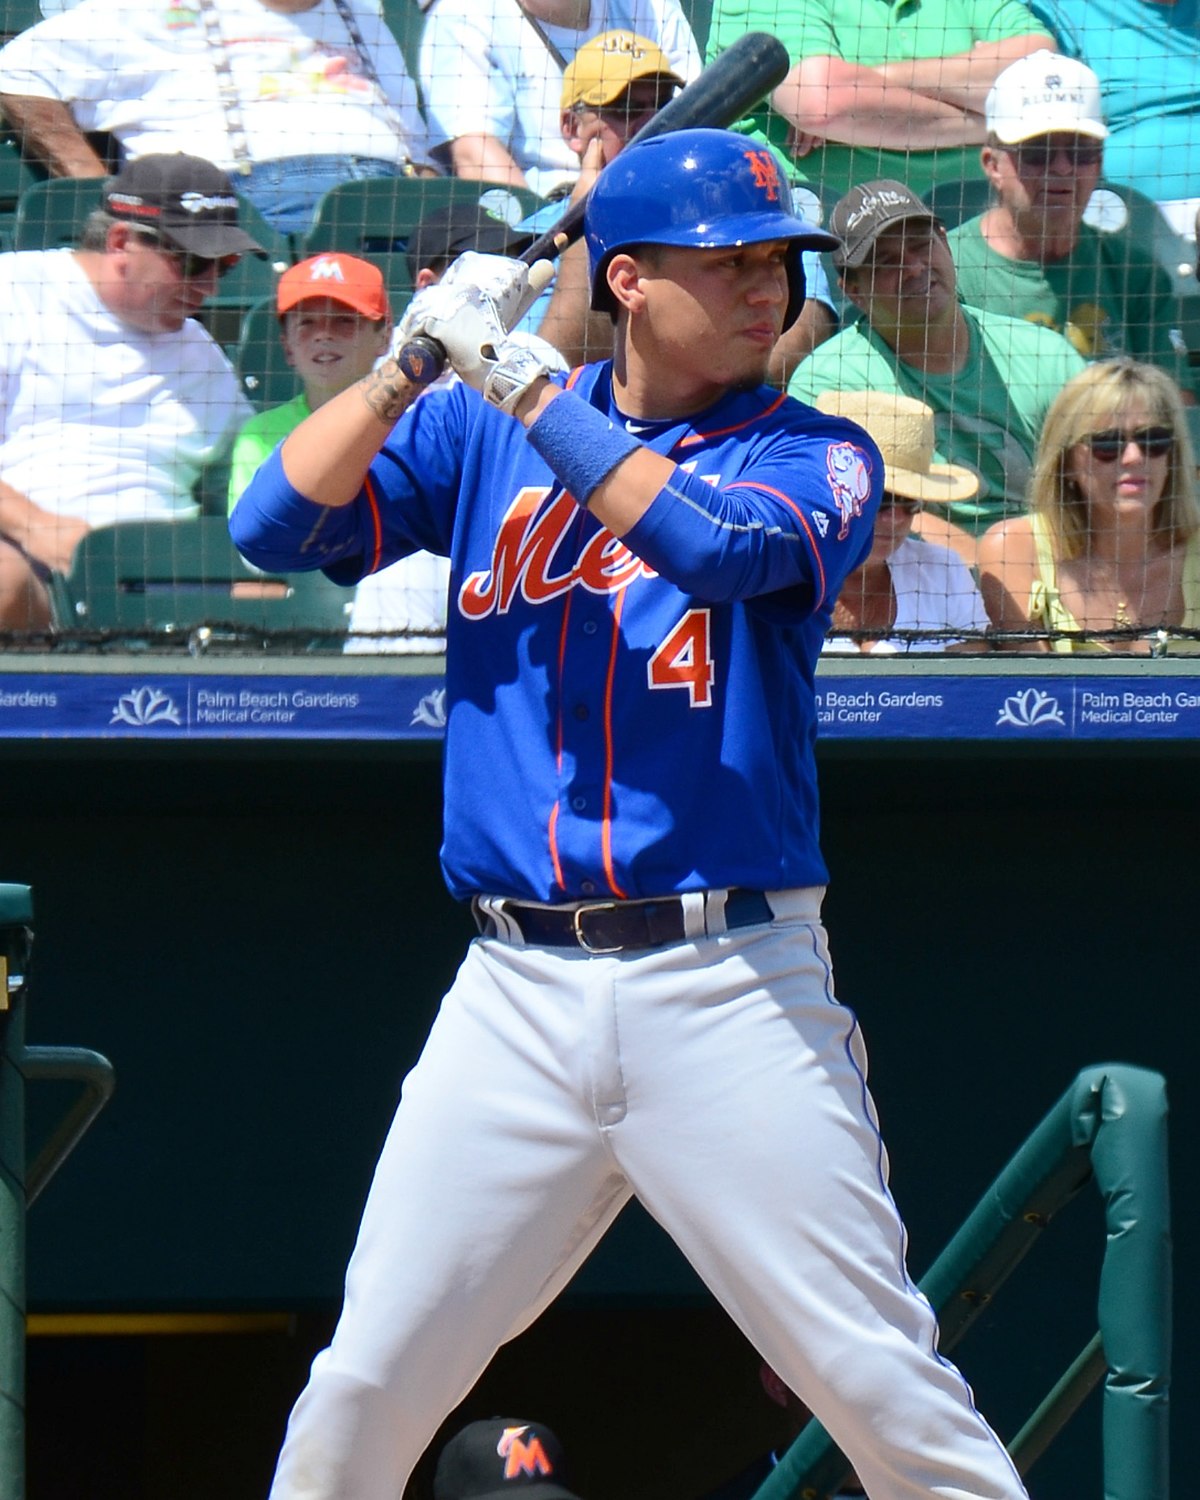 Wilmer Flores - Wikipedia